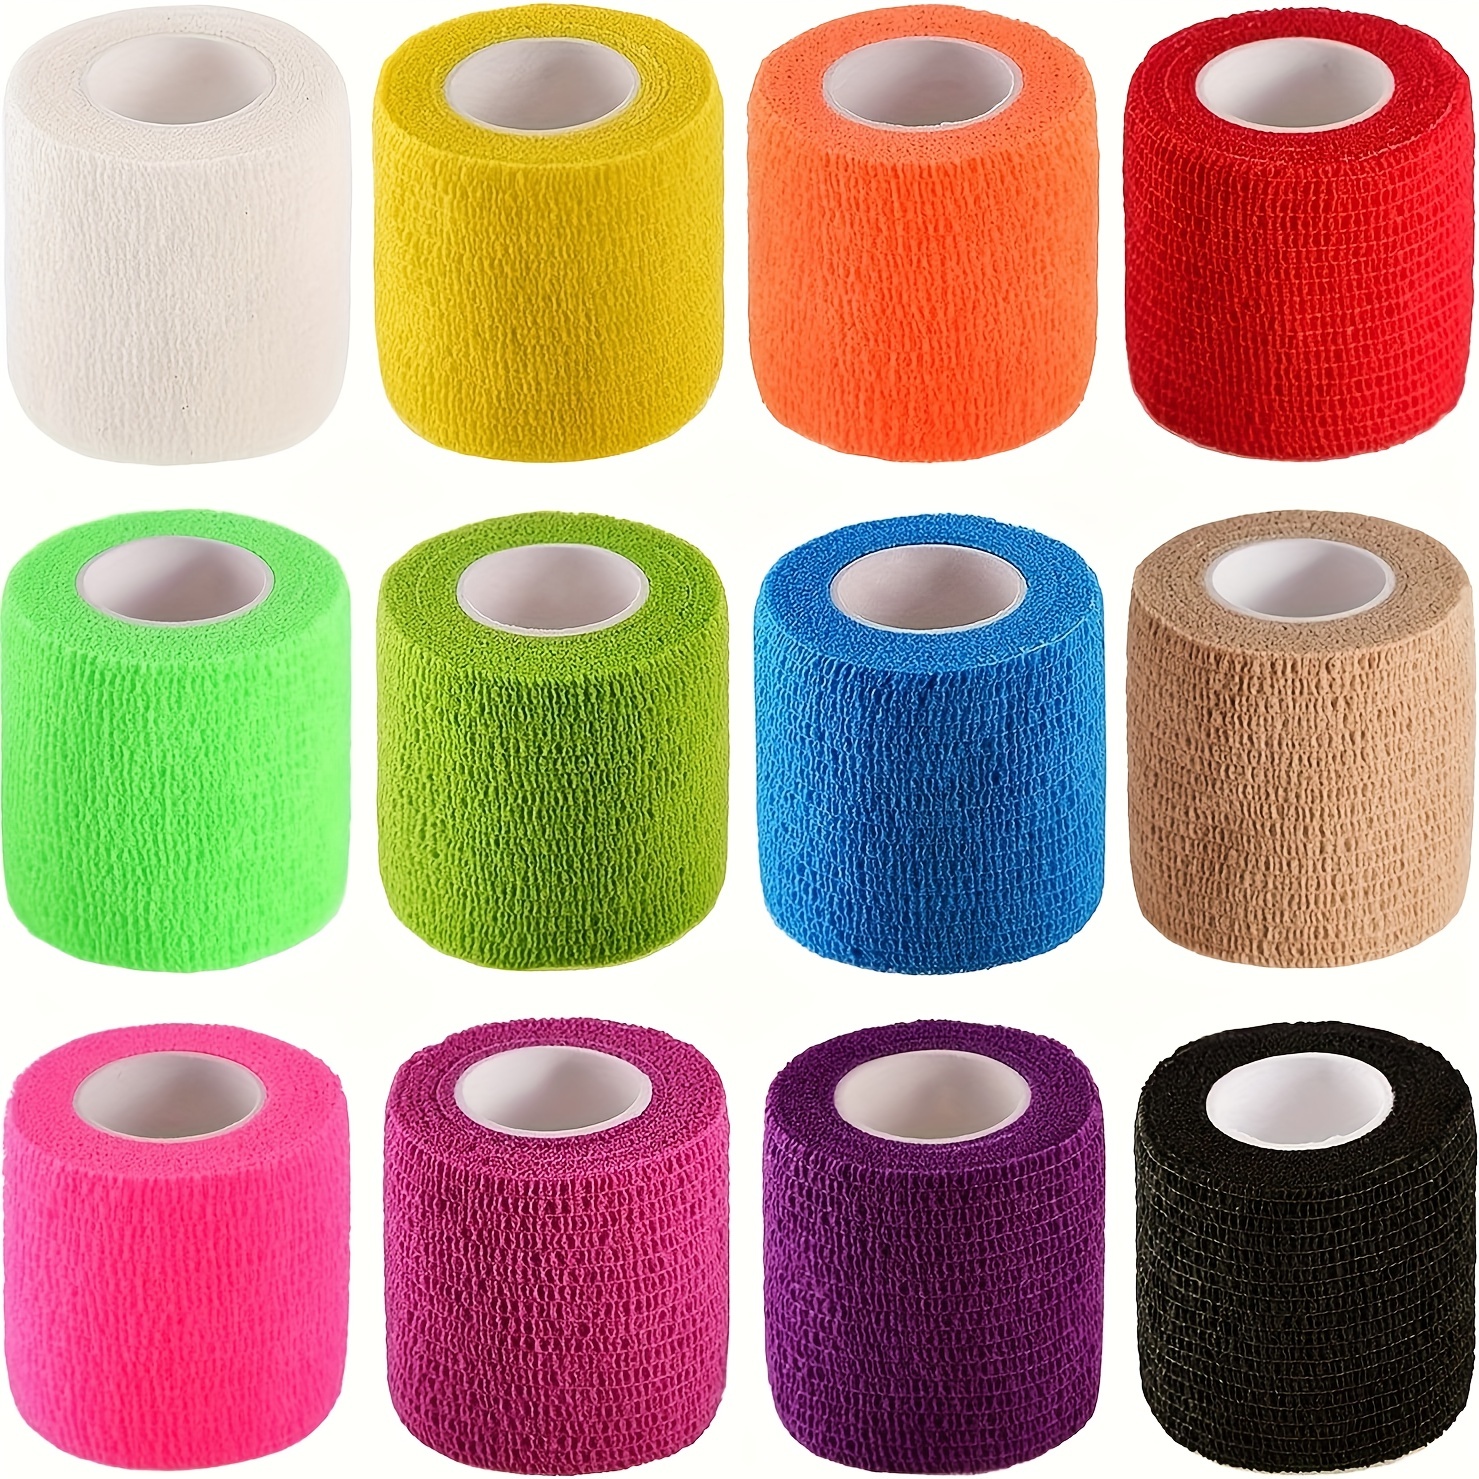 Pangda 12 Pieces Adhesive Bandage Wrap Stretch Self-Adherent Tape for Sports Wrist Ankle 5 Yards Each (12 Colors 2 Inches)